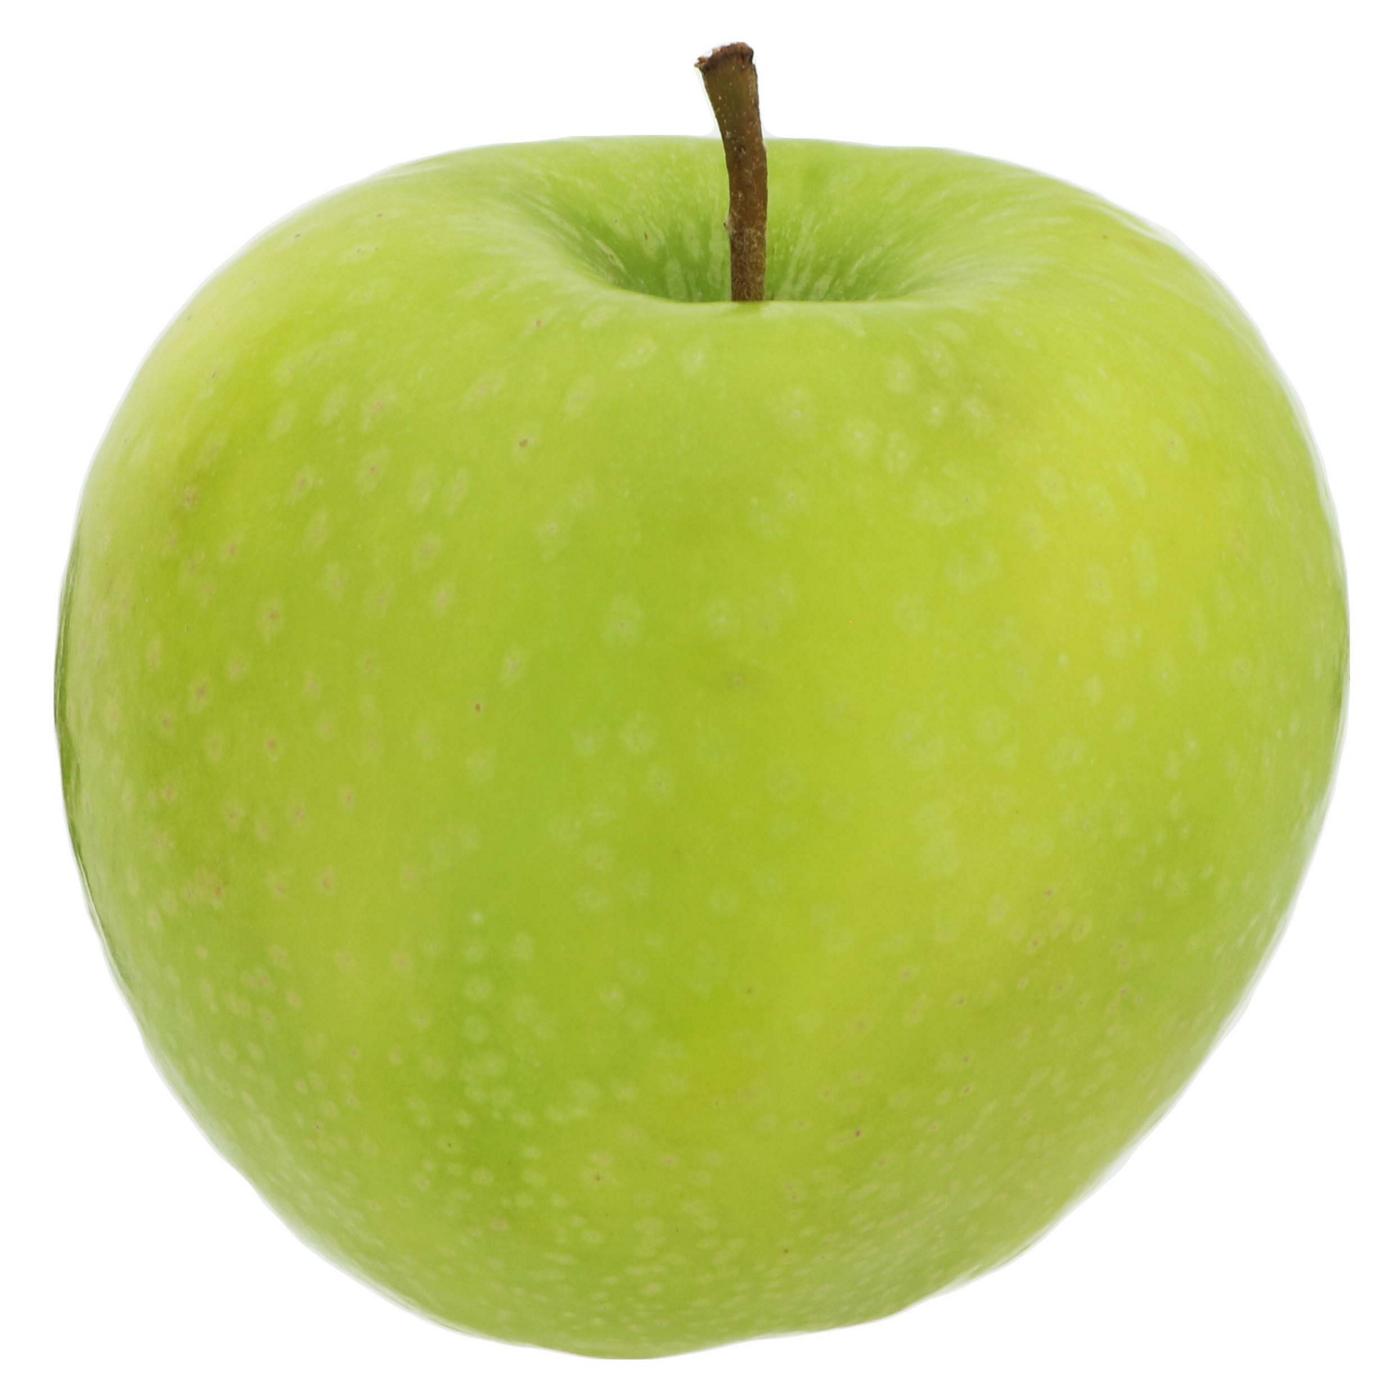 Granny Smith - Green Apples - Nutrition Stock Image - Image of